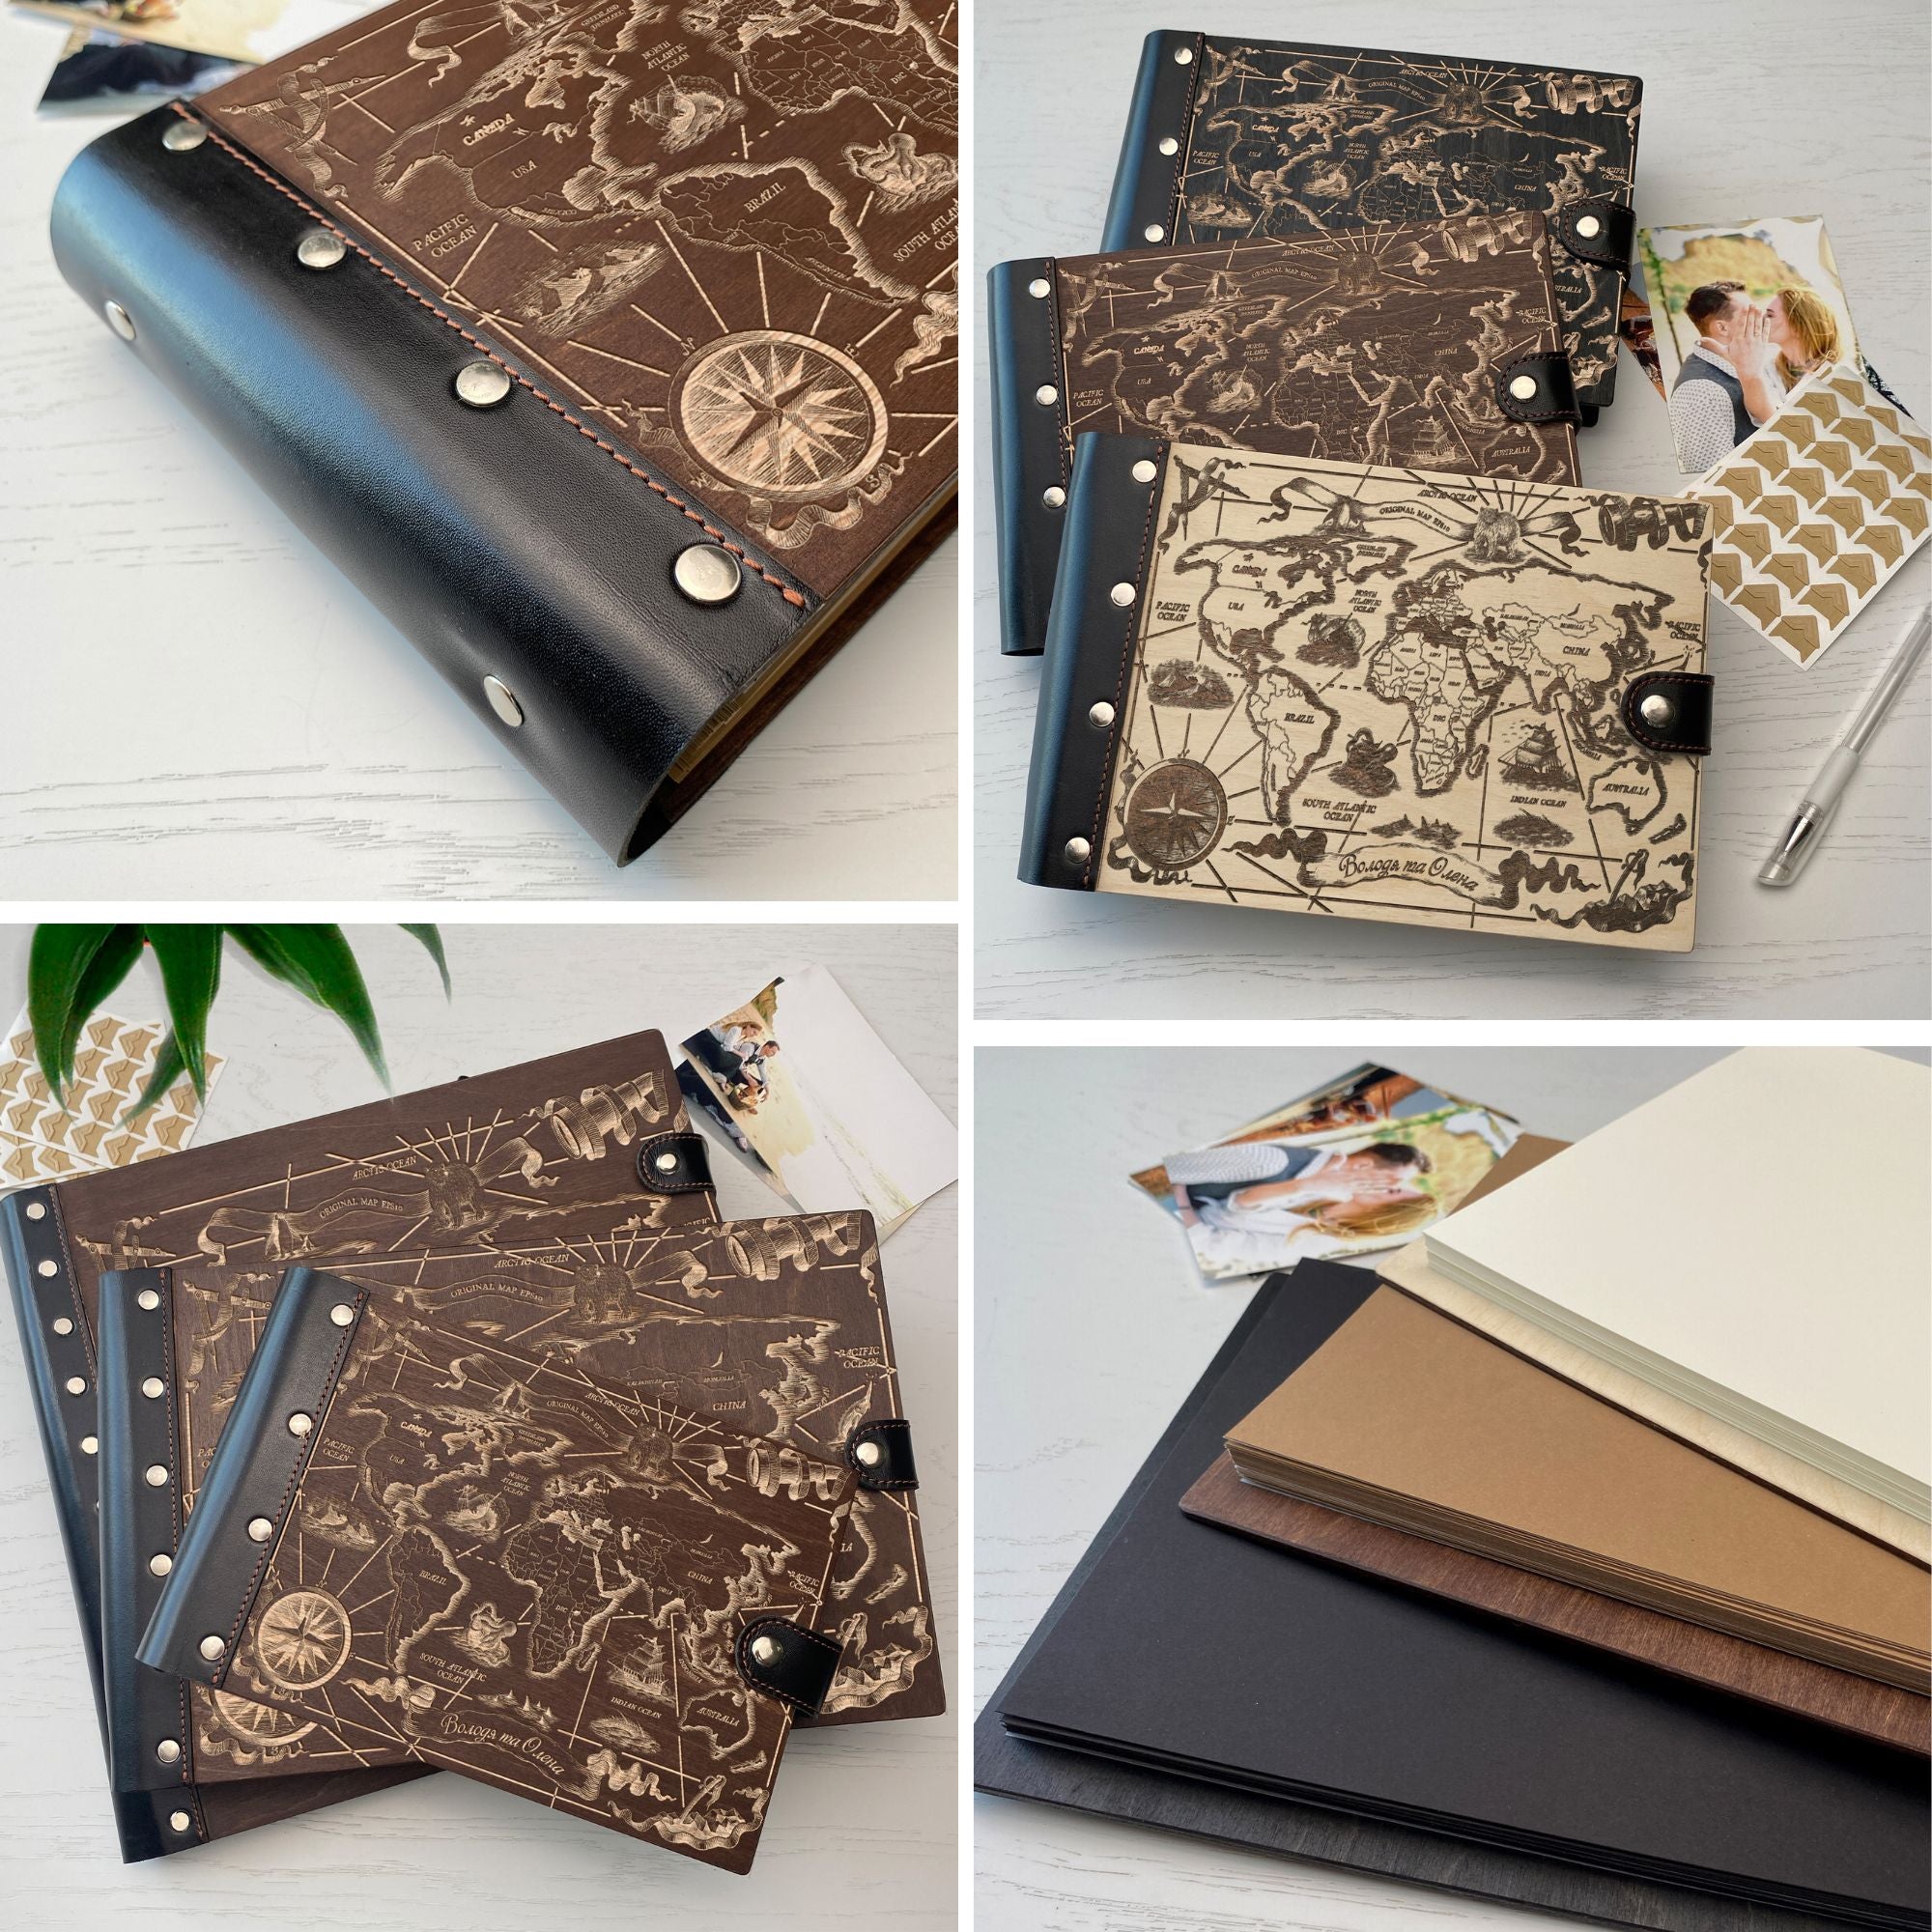 Personalized photo album with leather cover and My World engraving